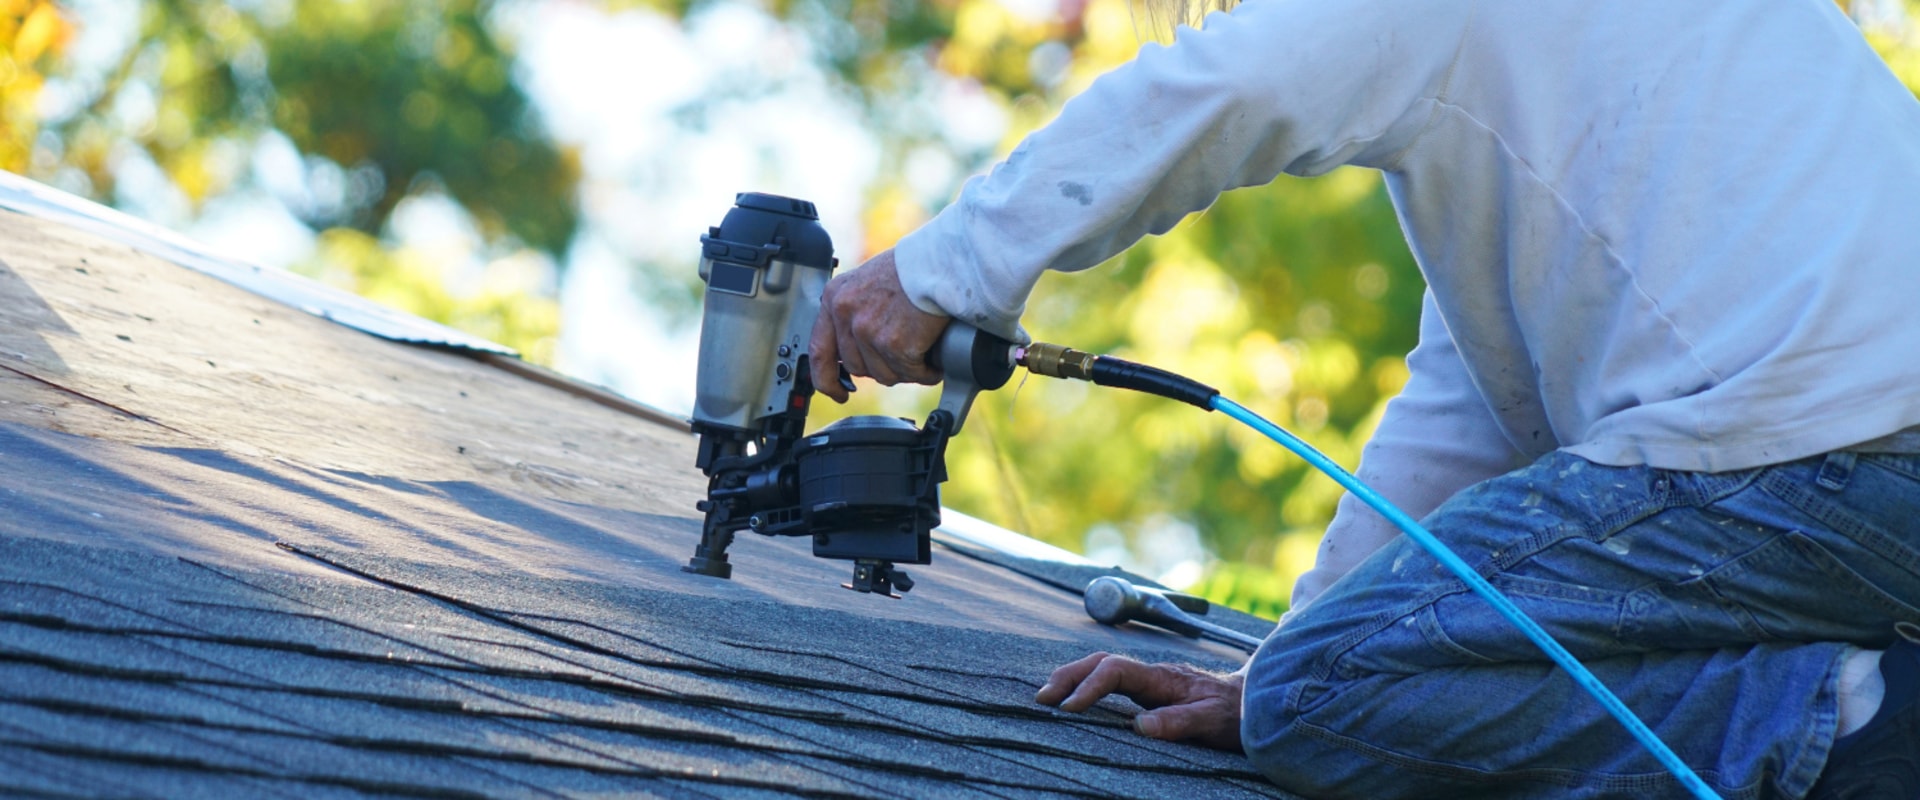 Roof Repair Services: A Comprehensive Look